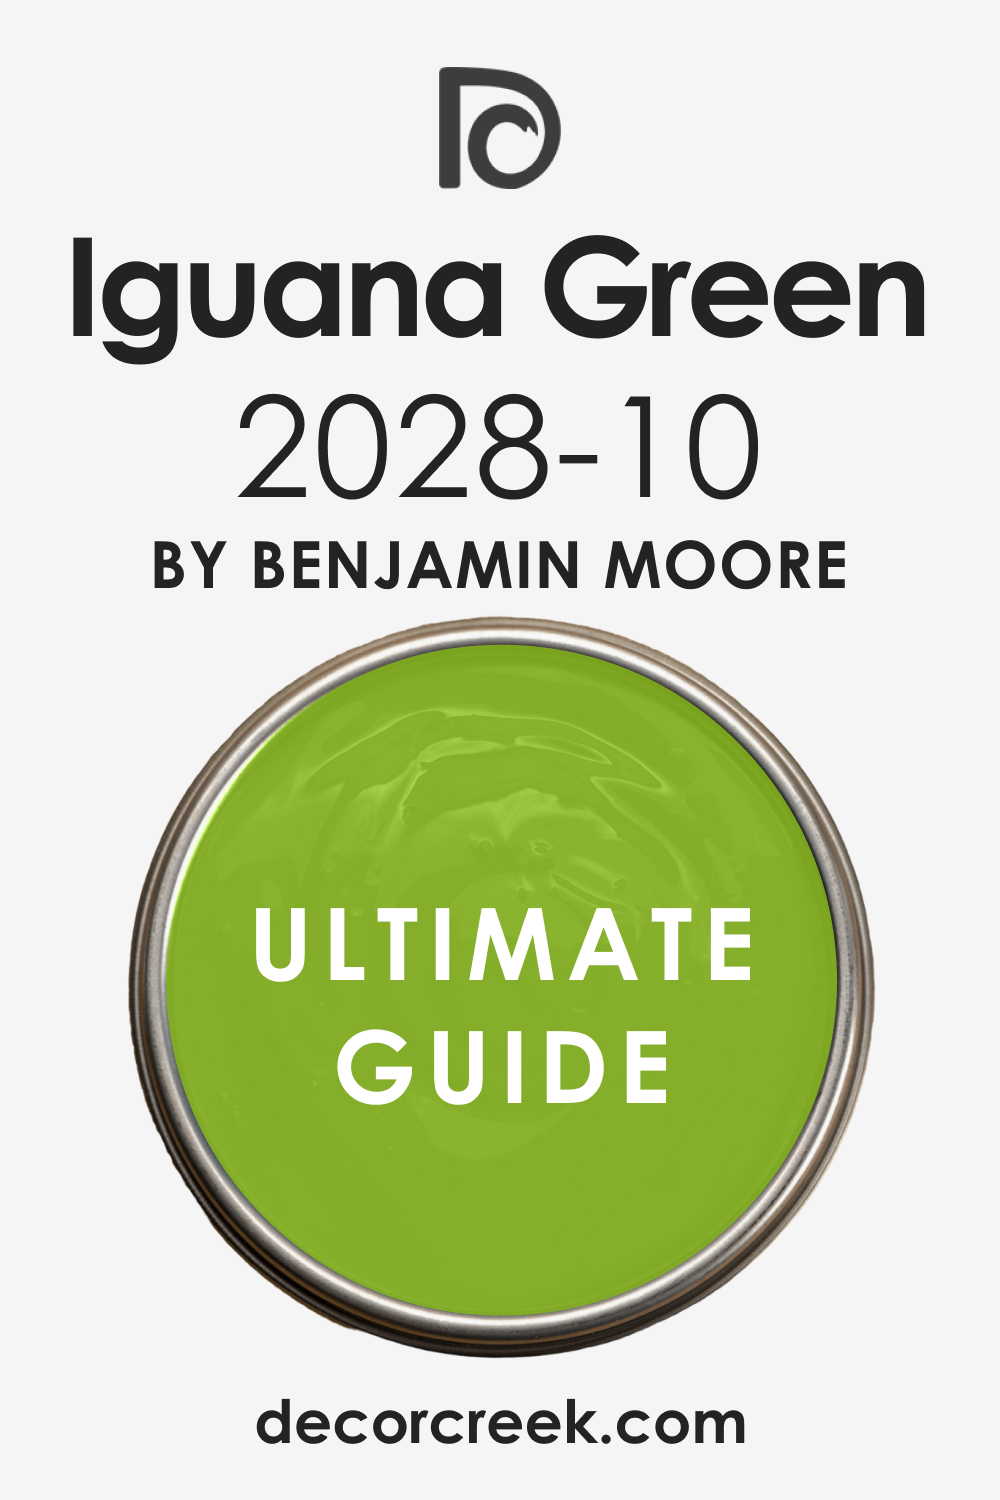 Ultimate Guide of Iguana Green 2028-10